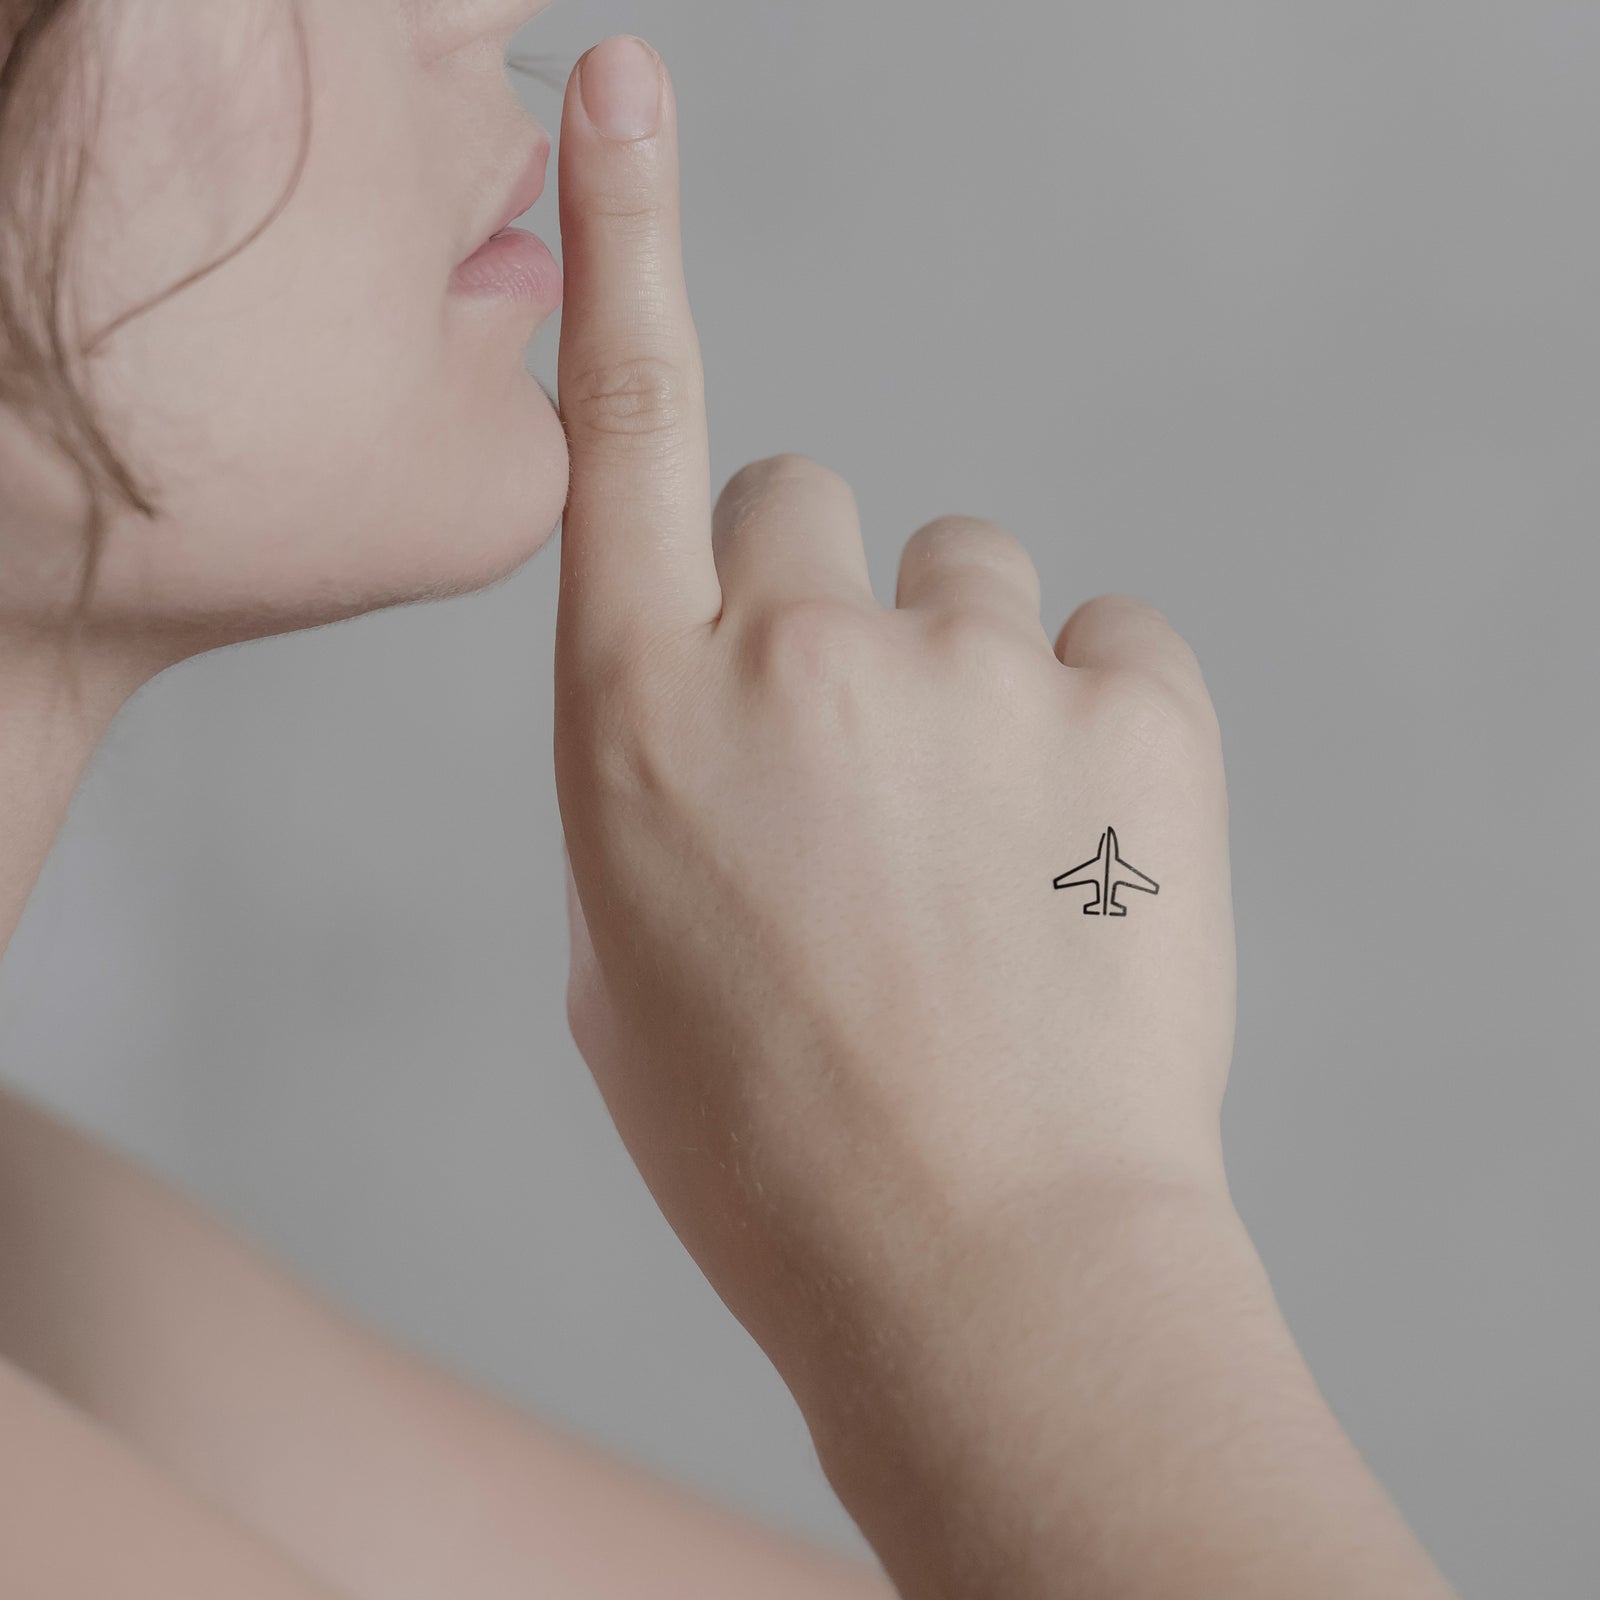 30 small/minimalist tattoos for everyone - You need to know